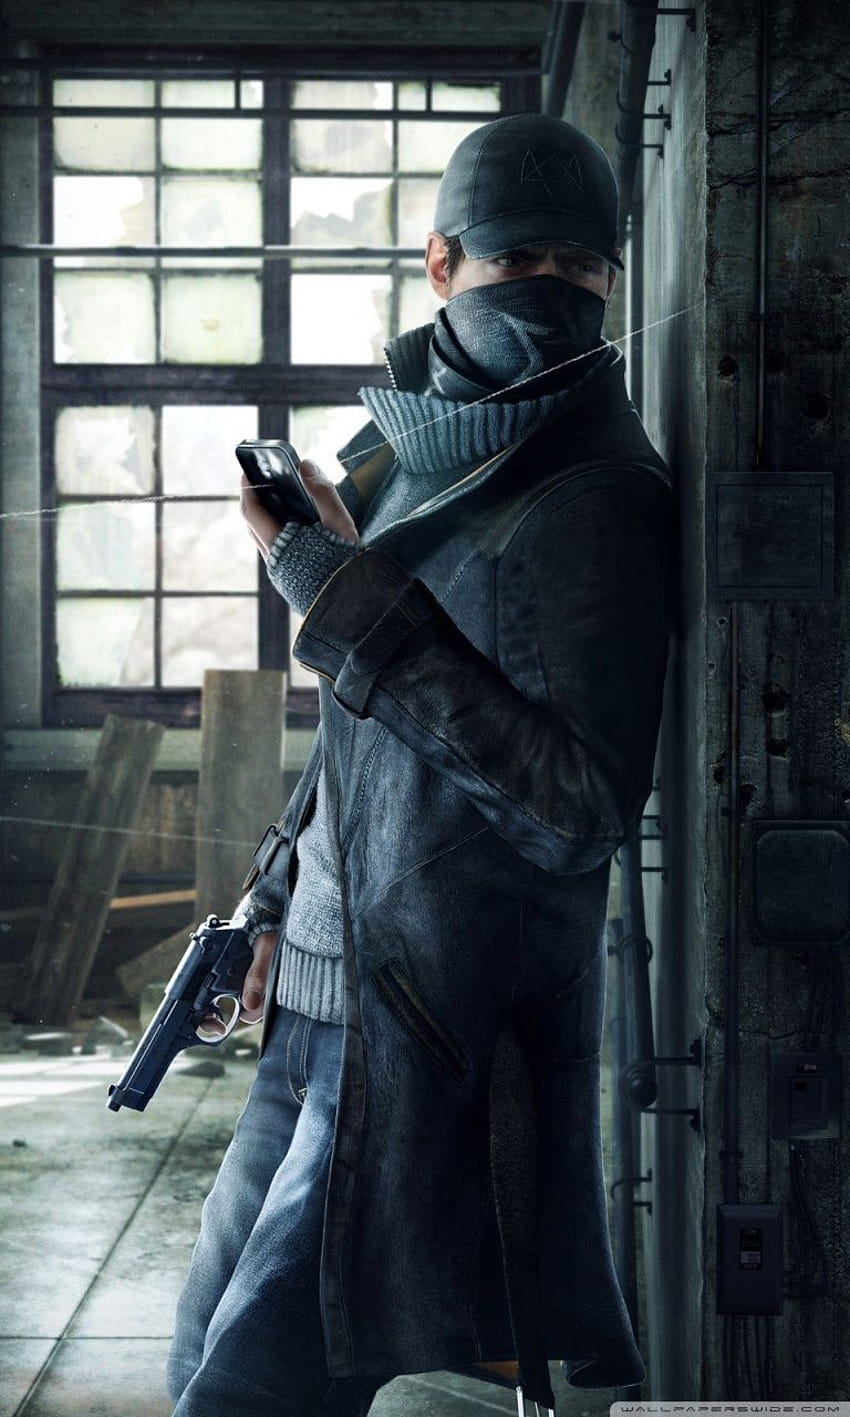 WATCH_DOGS Aiden Pearce Ultra Backgrounds for U TV : Multi Display, Dual Monitor : Tablet : Smartphone HD phone wallpaper